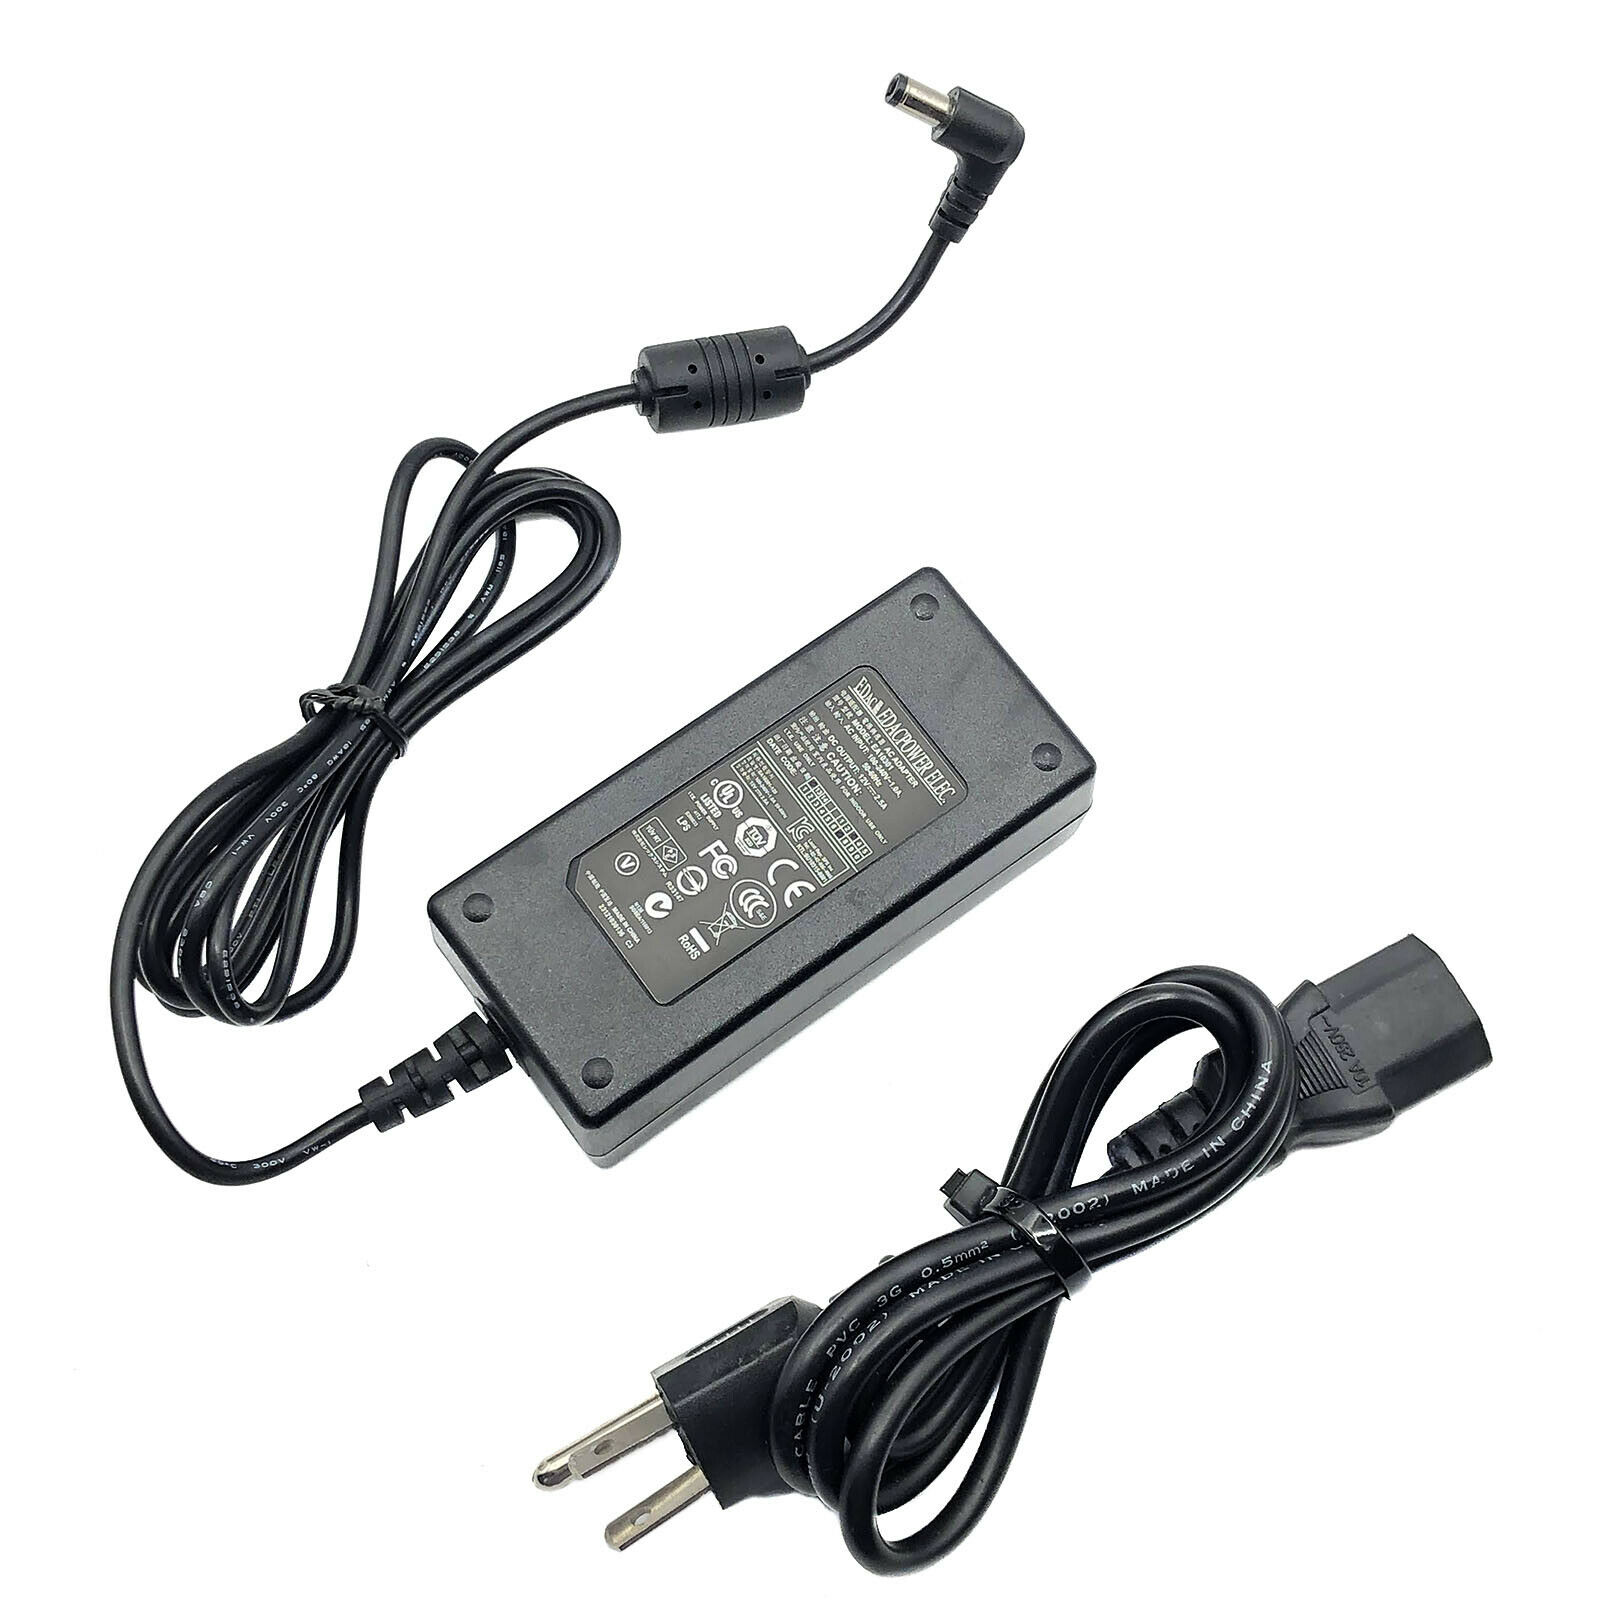 Genuine AC Adapter Edac for Yamaha Piano Keyboard PSR/PDX/PA/P - Series w/Cord Compatible Brand: For Yamaha Connectio